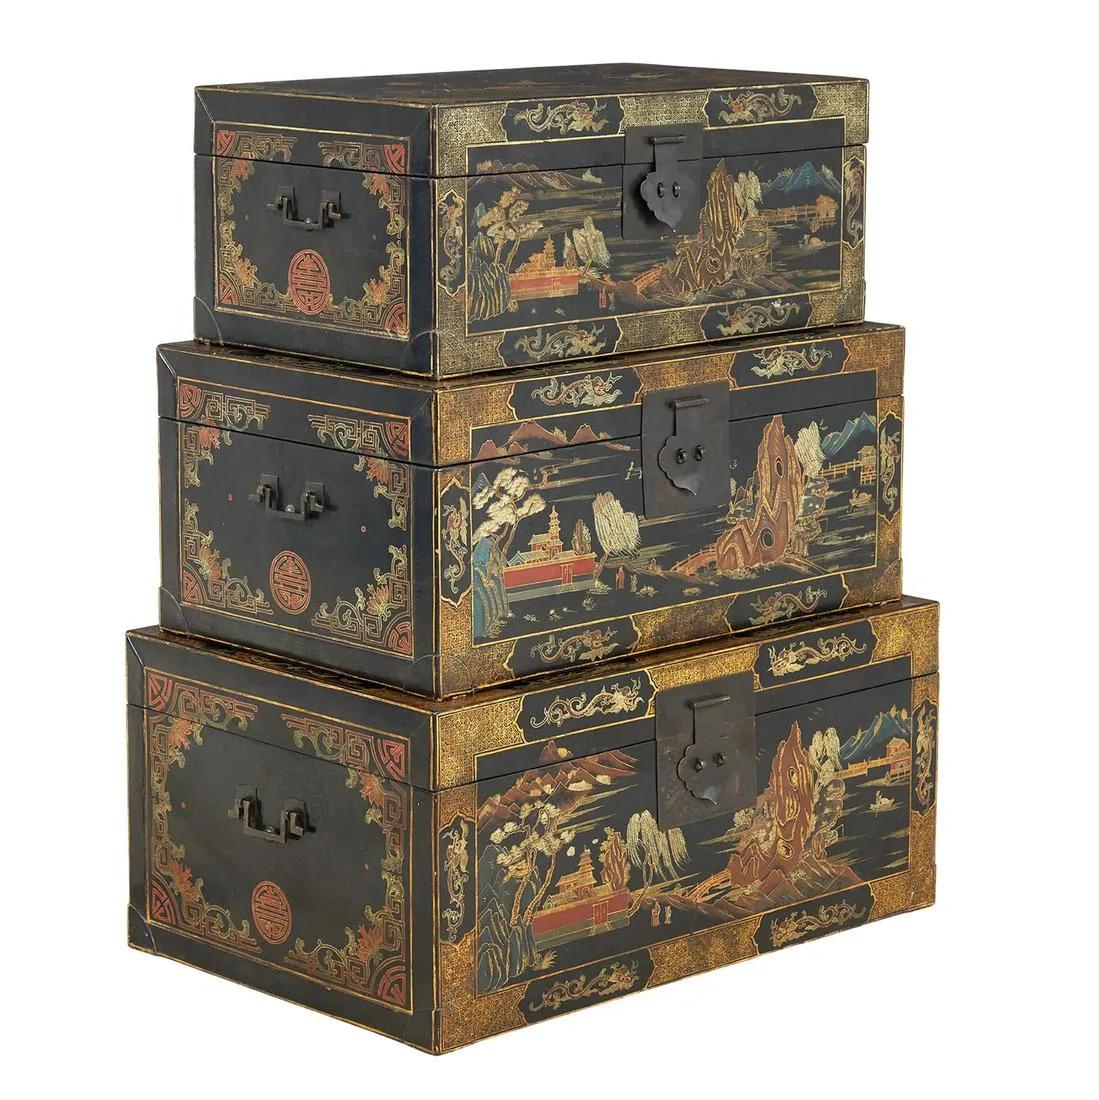 Set of three nested Chinese ebonized trunks,
circa 1900

The China Trade trunks are each of rectangular form with gilt and polychrome painting of birds and flowers and landscape scenes on a black ground, all with decorative hardware and carrying